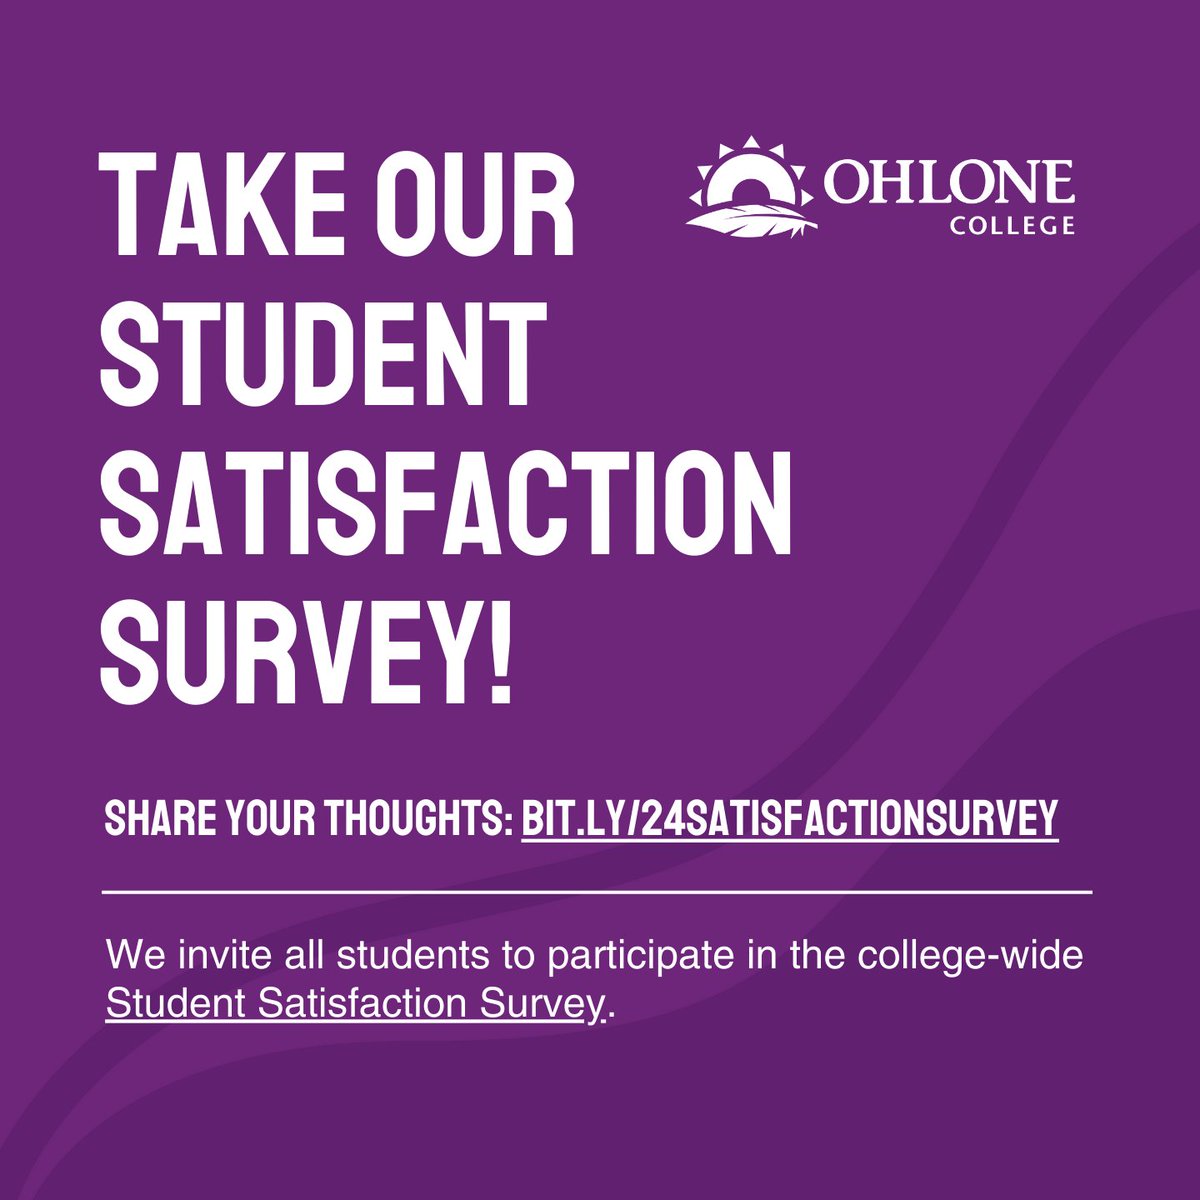 Your feedback matters! The Office of Research and Planning would like to invite you to participate in the Student #SatisfactionSurvey. To show our appreciation, we’ll be giving away a $20 surprise gift for every 20th respondent. Take the survey here: bit.ly/4alcBpG